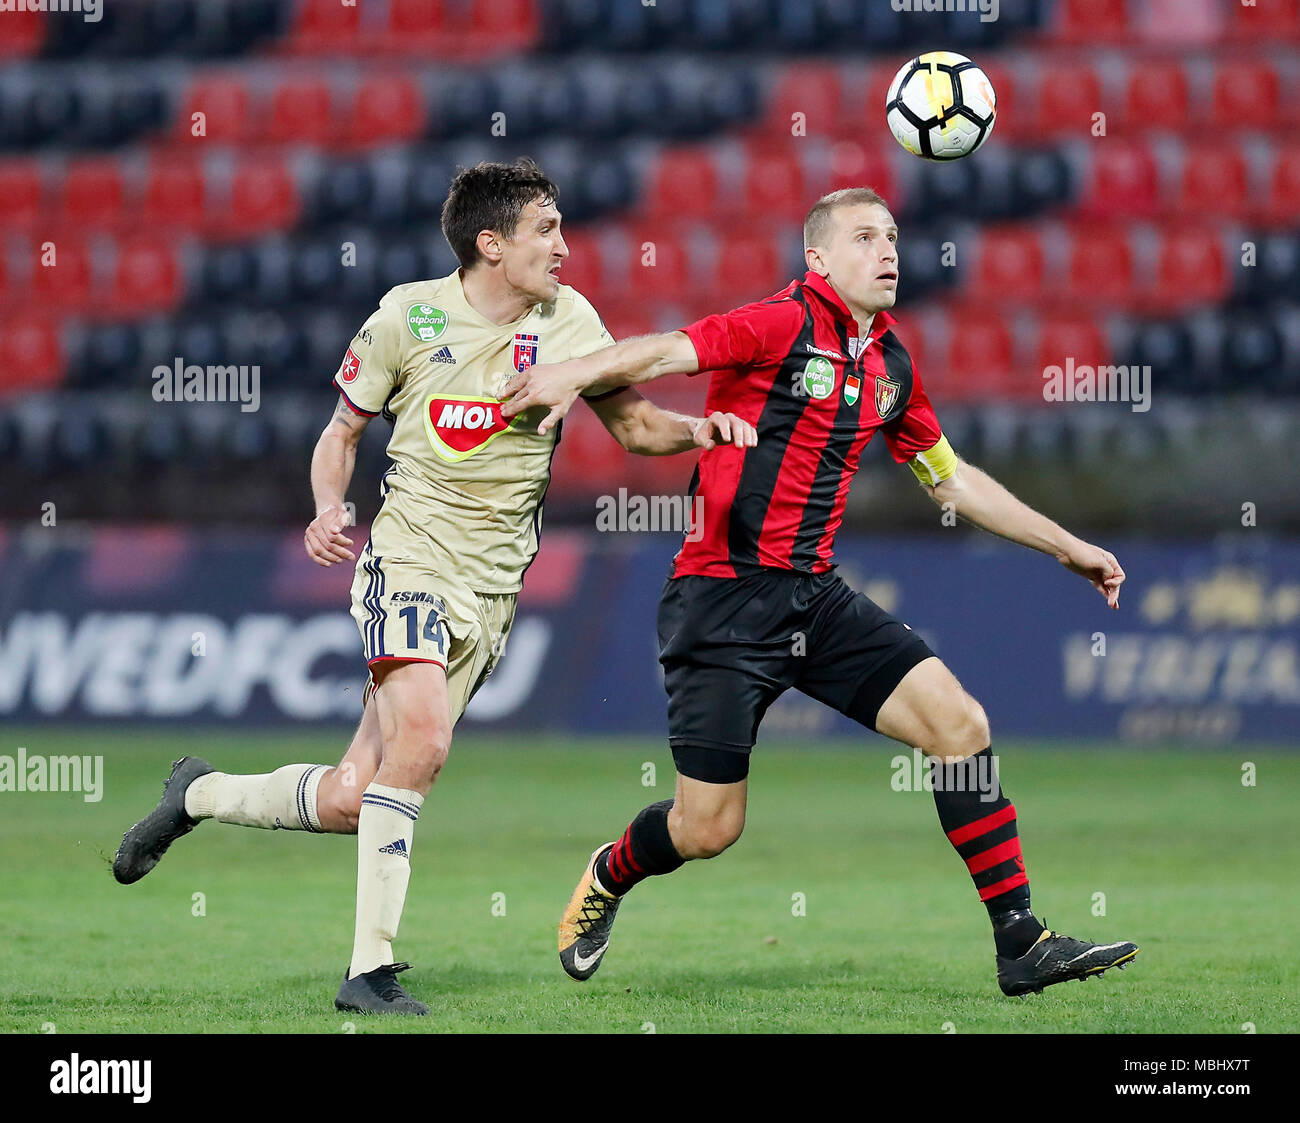 BUDAPEST, HUNGARY - APRIL 11: (l-r) Stefan Scepovic of Videoton FC competes for the ball with Djordje Kamber of Budapest Honved during the Hungarian OTP Bank Liga match between Budapest Honved and Videoton FC at Bozsik Stadium on April 11, 2018 in Budapest, Hungary. Stock Photo